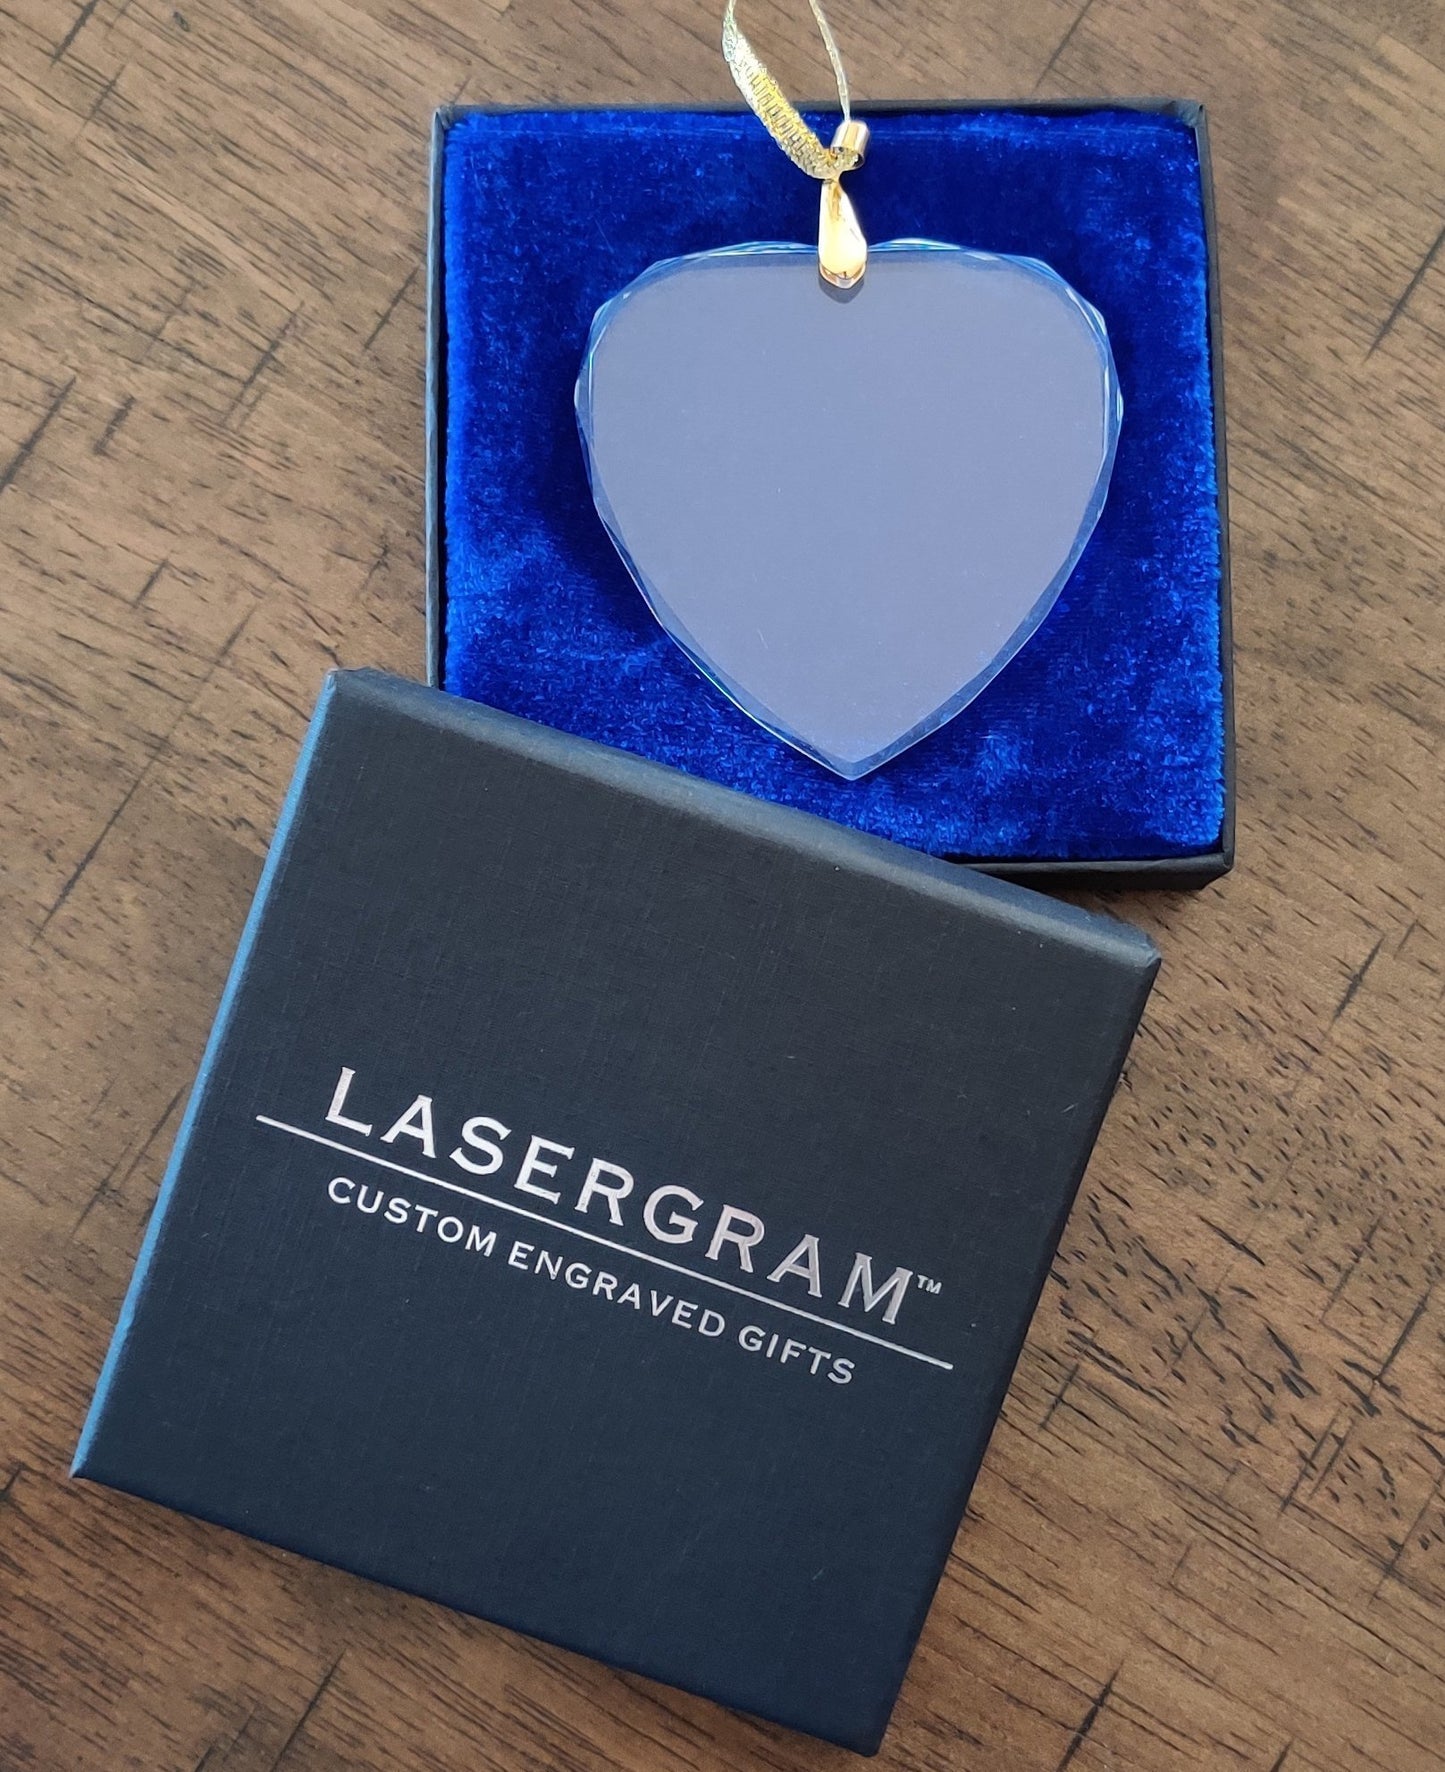 LaserGram Christmas Ornament, Hummingbird, Personalized Engraving Included (Heart Shape)